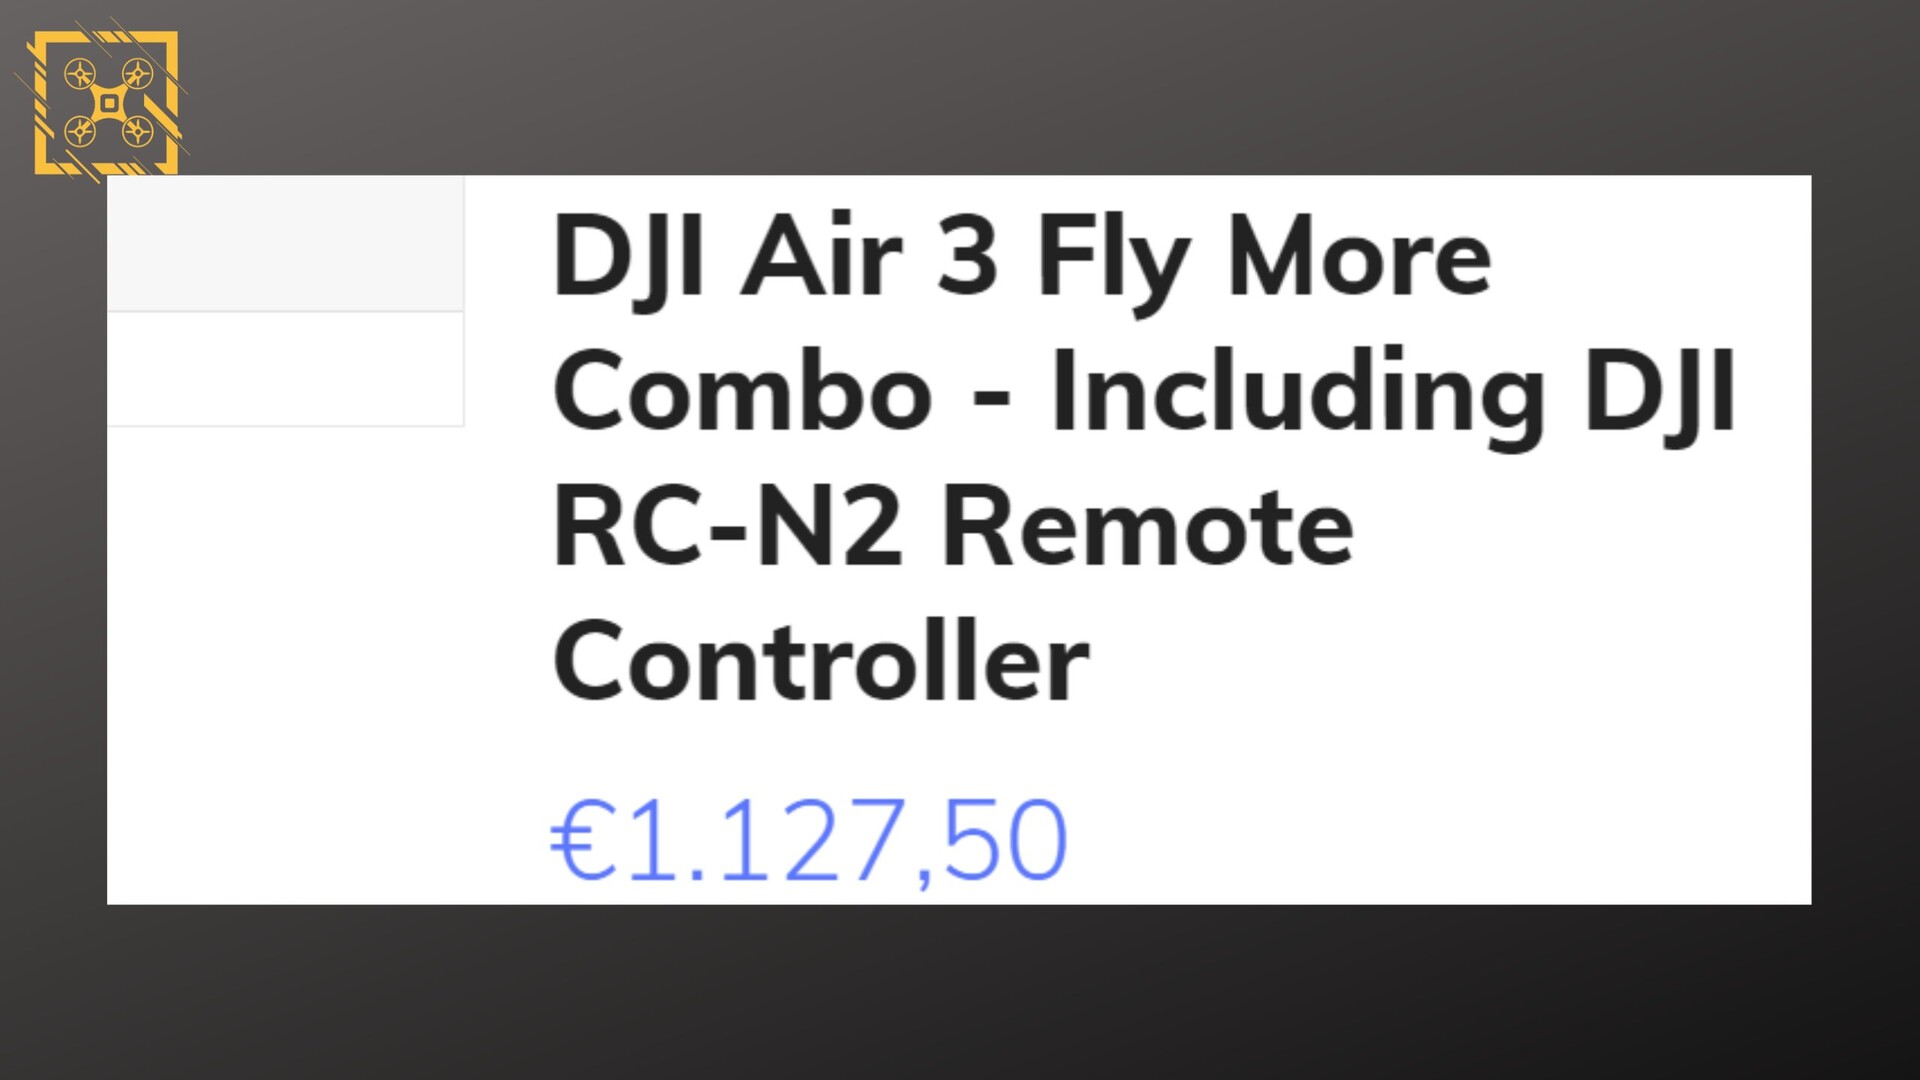 DJI Air 3 Fly More Combo Prices Revealed. Release Date July?